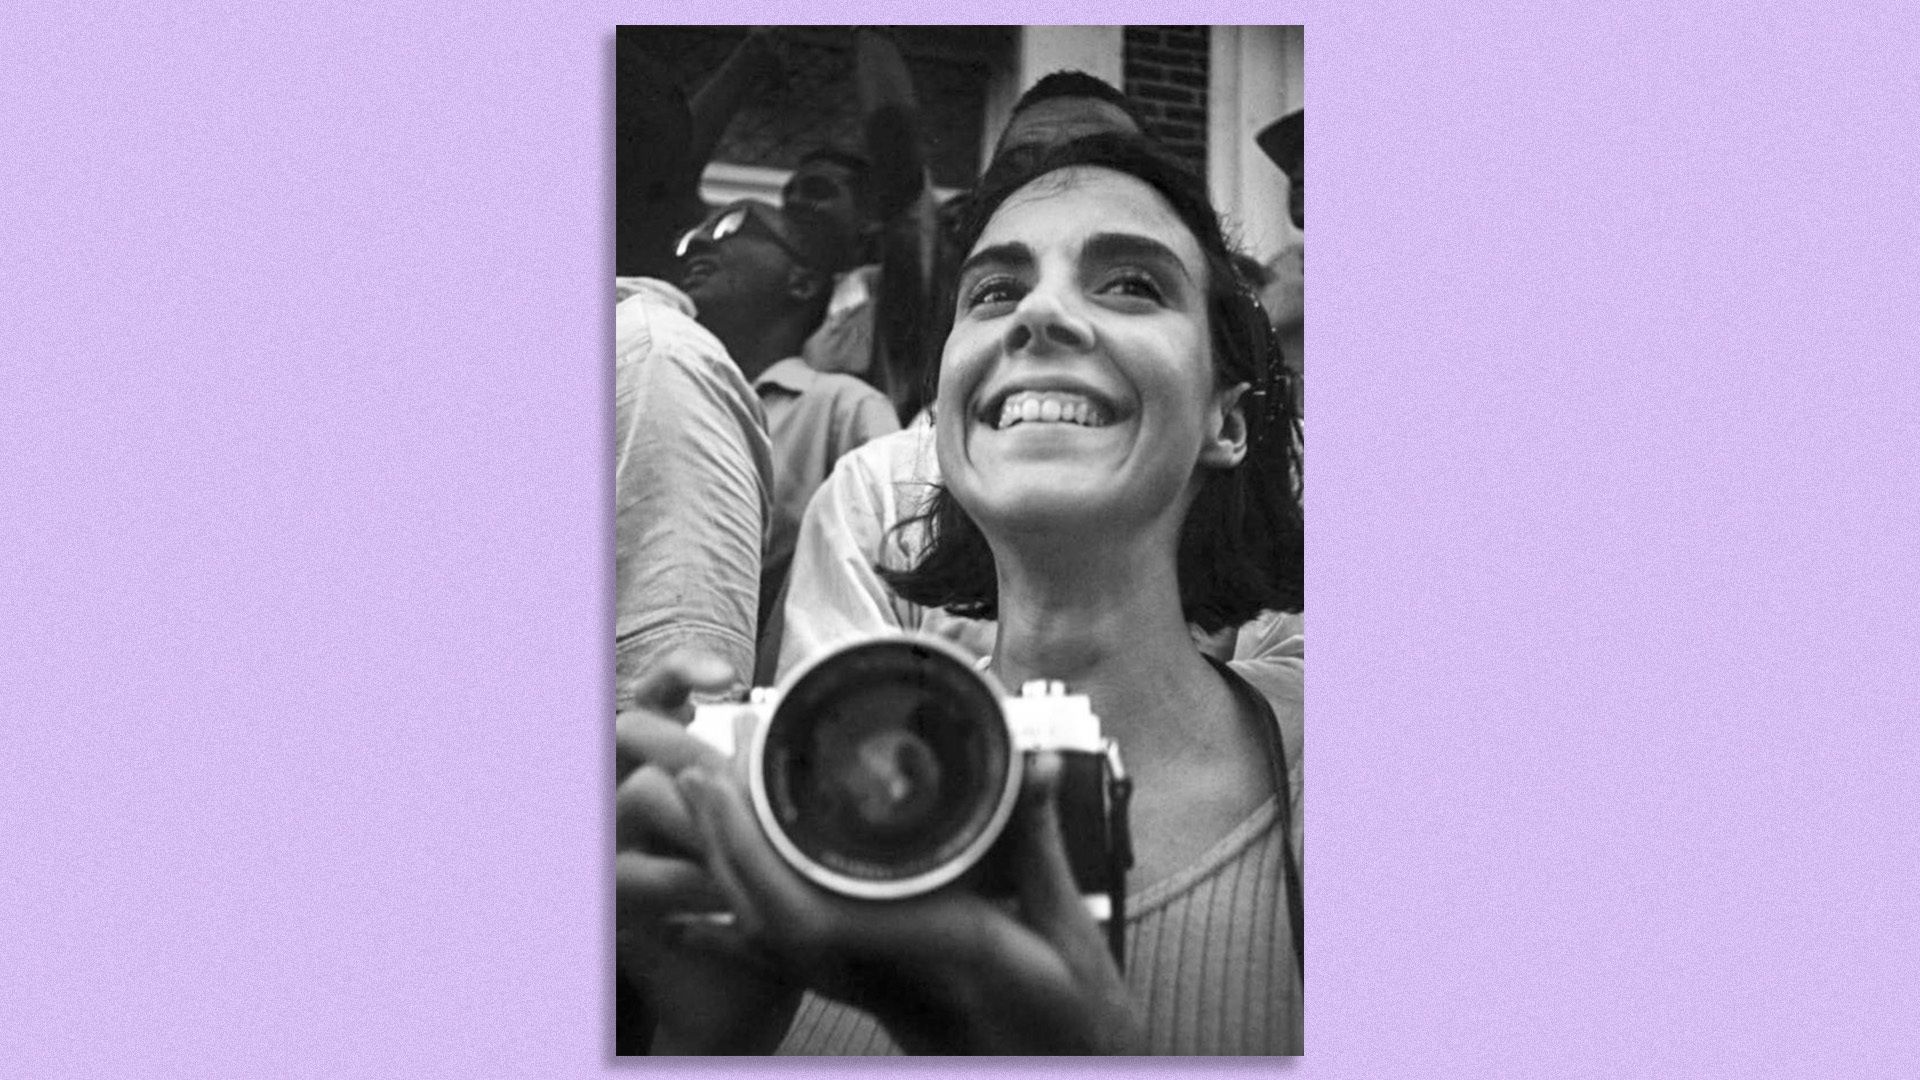 A black and white photograph against a purple backdrop shows photographer Maria Varela holding a camera and smiling